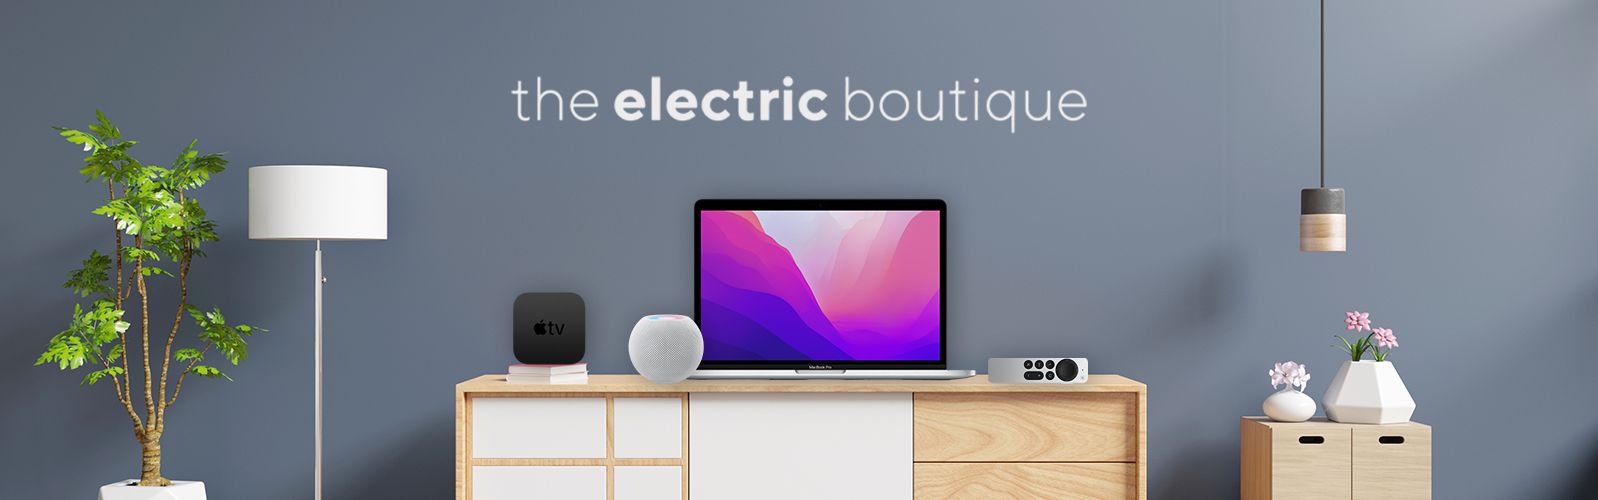 The electric boutique